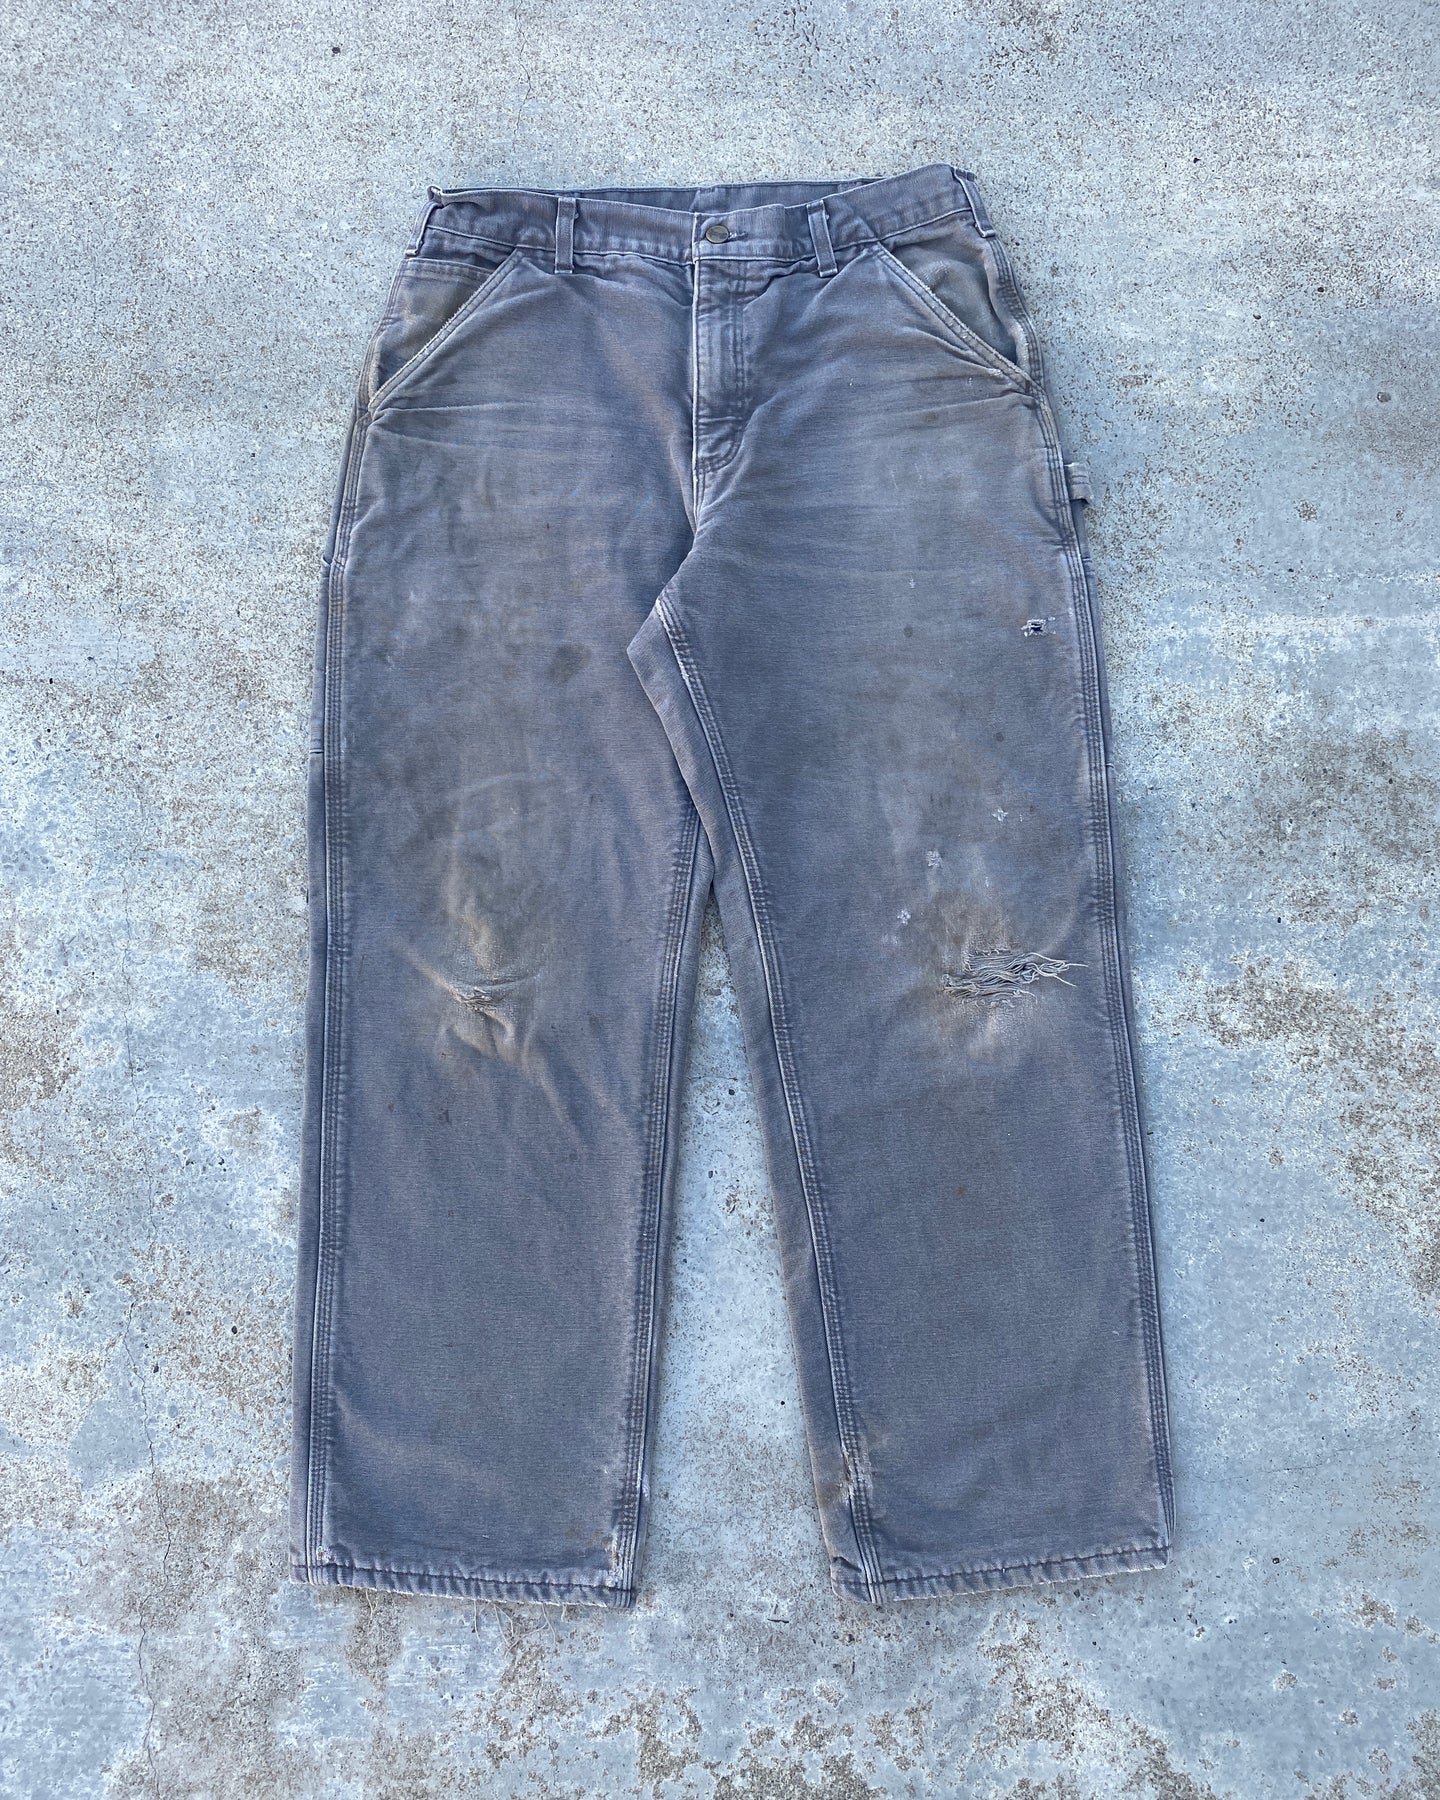 Dirty Wash Carhartt Flannel Lined Gravel Carpenter Pants - Size 34 x 30